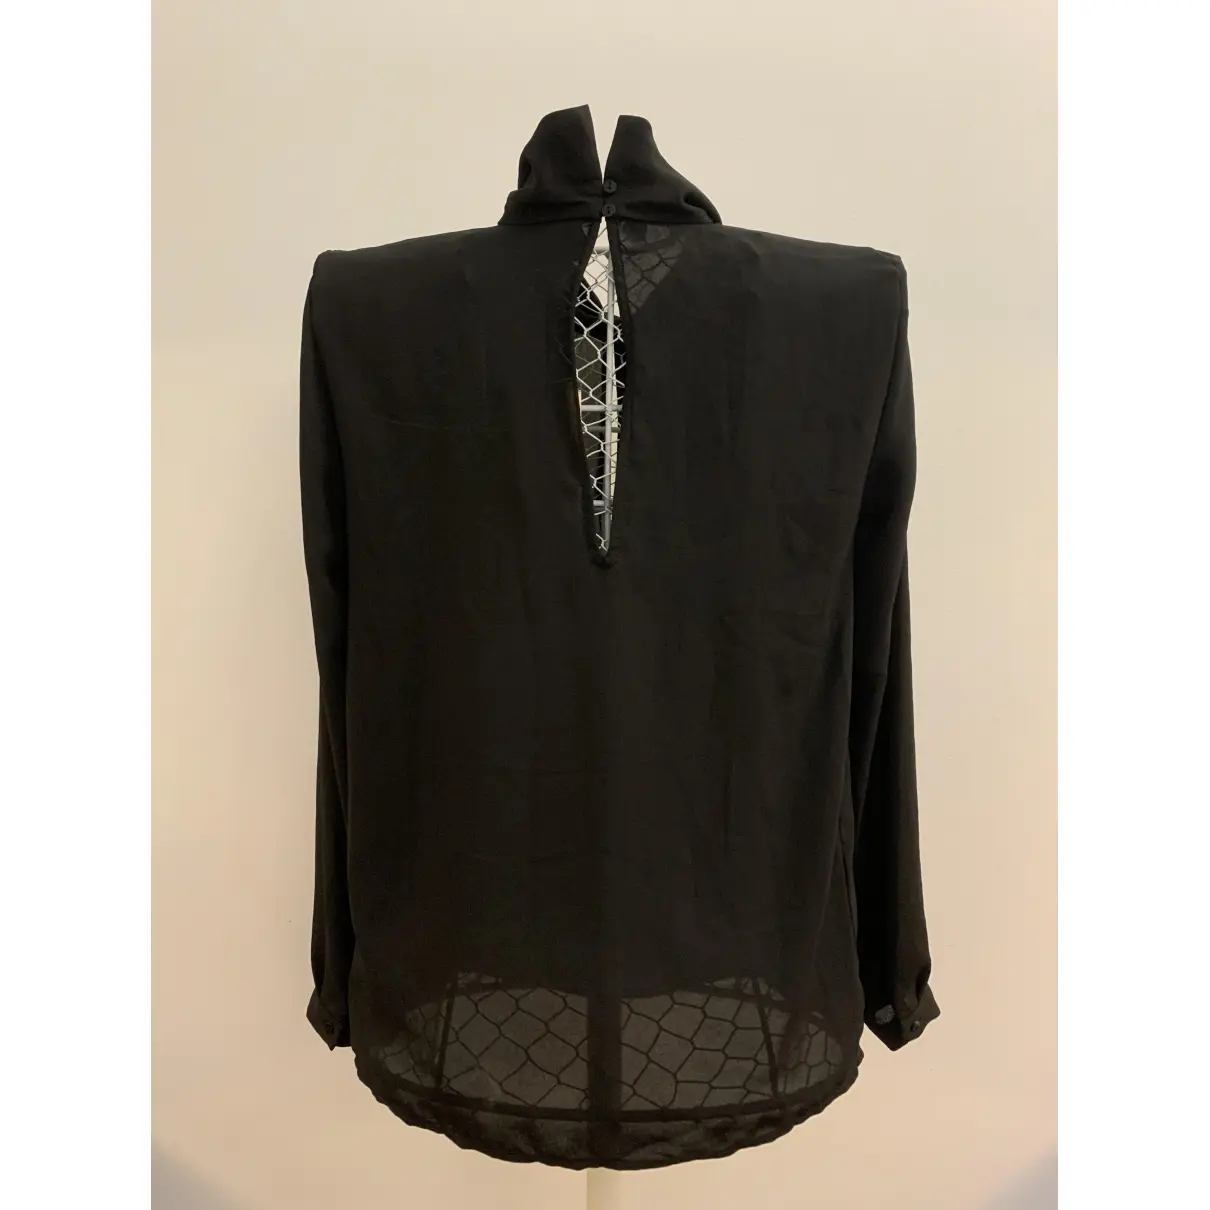 Buy Selected Blouse online